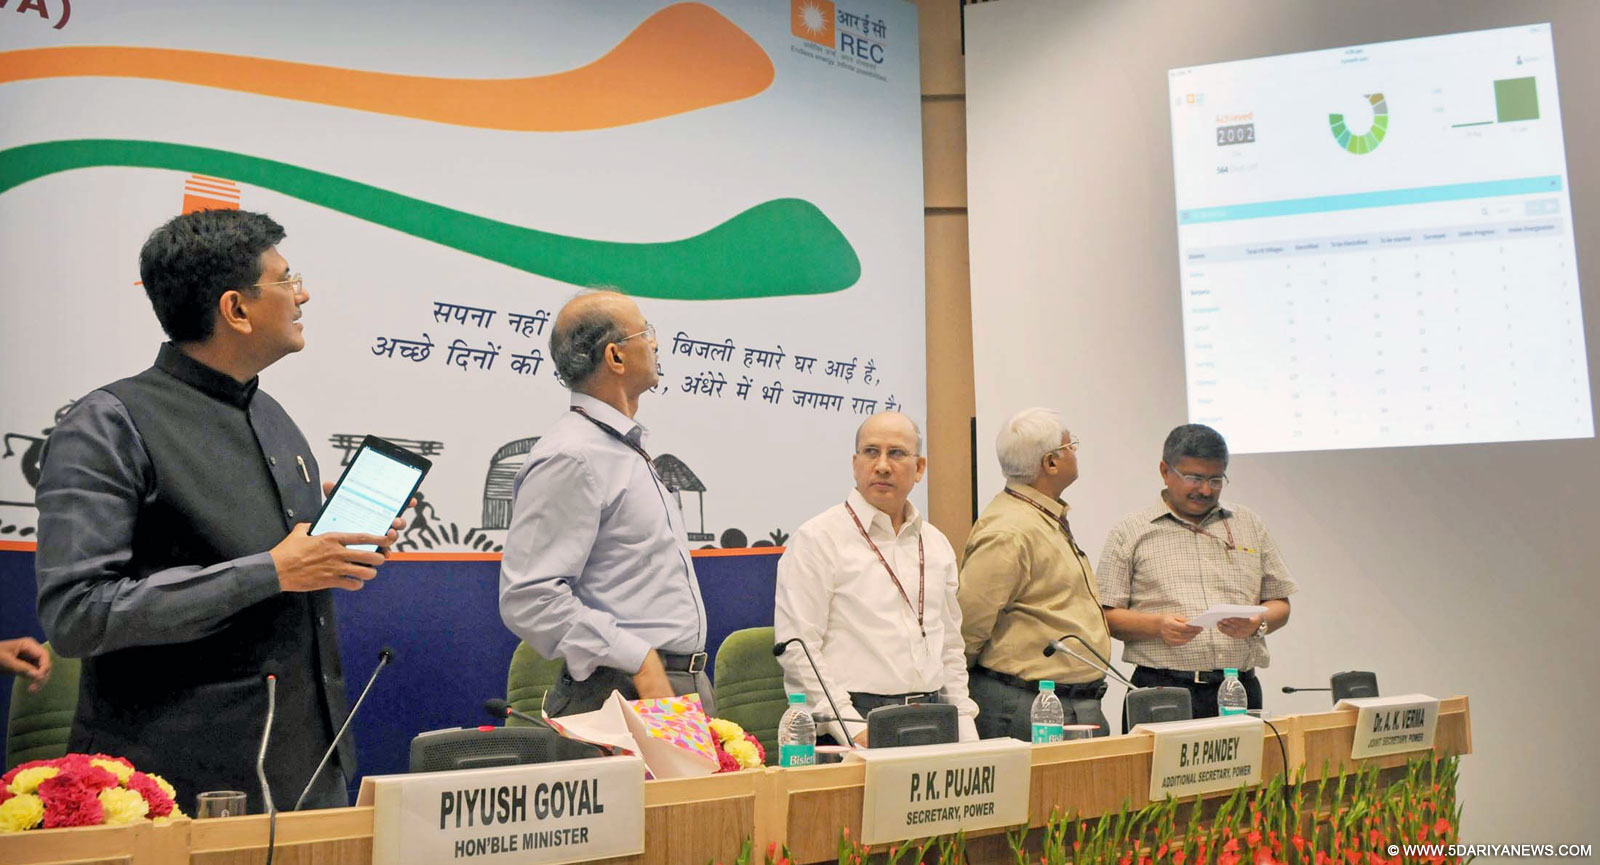 The Minister of State (Independent Charge) for Power, Coal and New and Renewable Energy, Shri Piyush Goyal launching the RE Mobile-App, at a function, in New Delhi on October 14, 2015. The Secretary, Ministry of Power, Shri P.K. Pujari and other dignitaries are also seen.